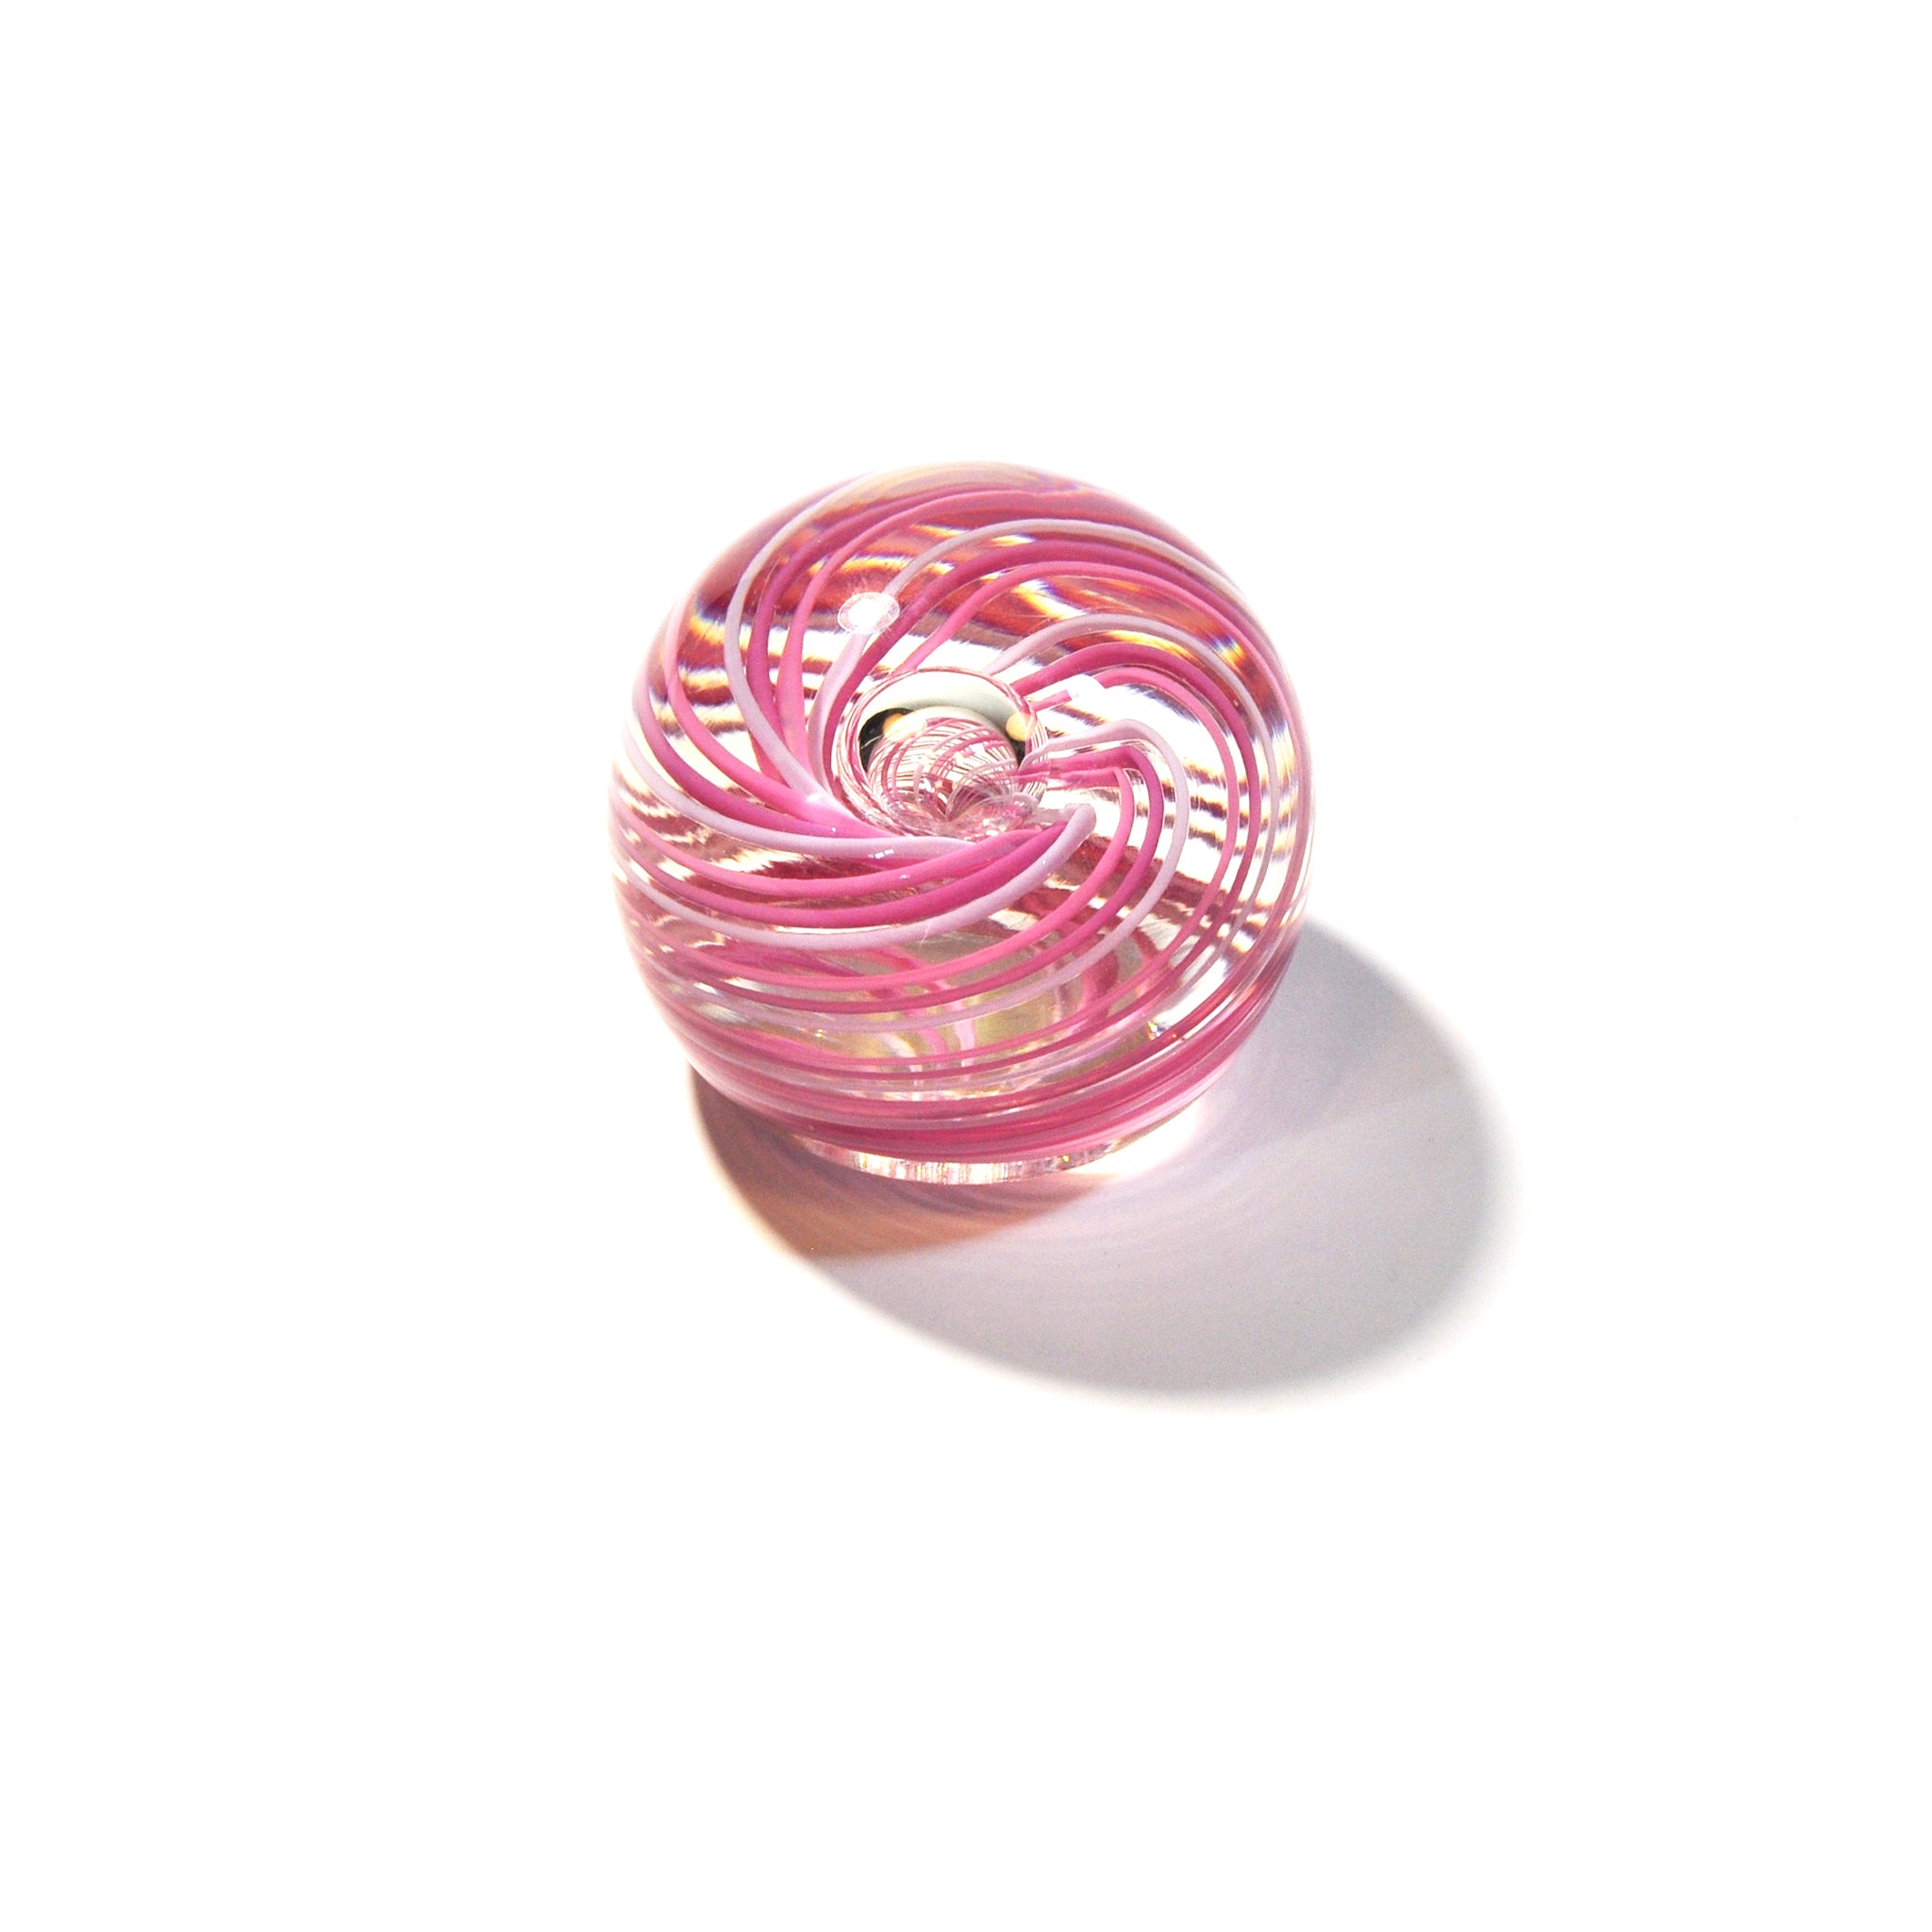 Candy Cane Paperweight | NZG